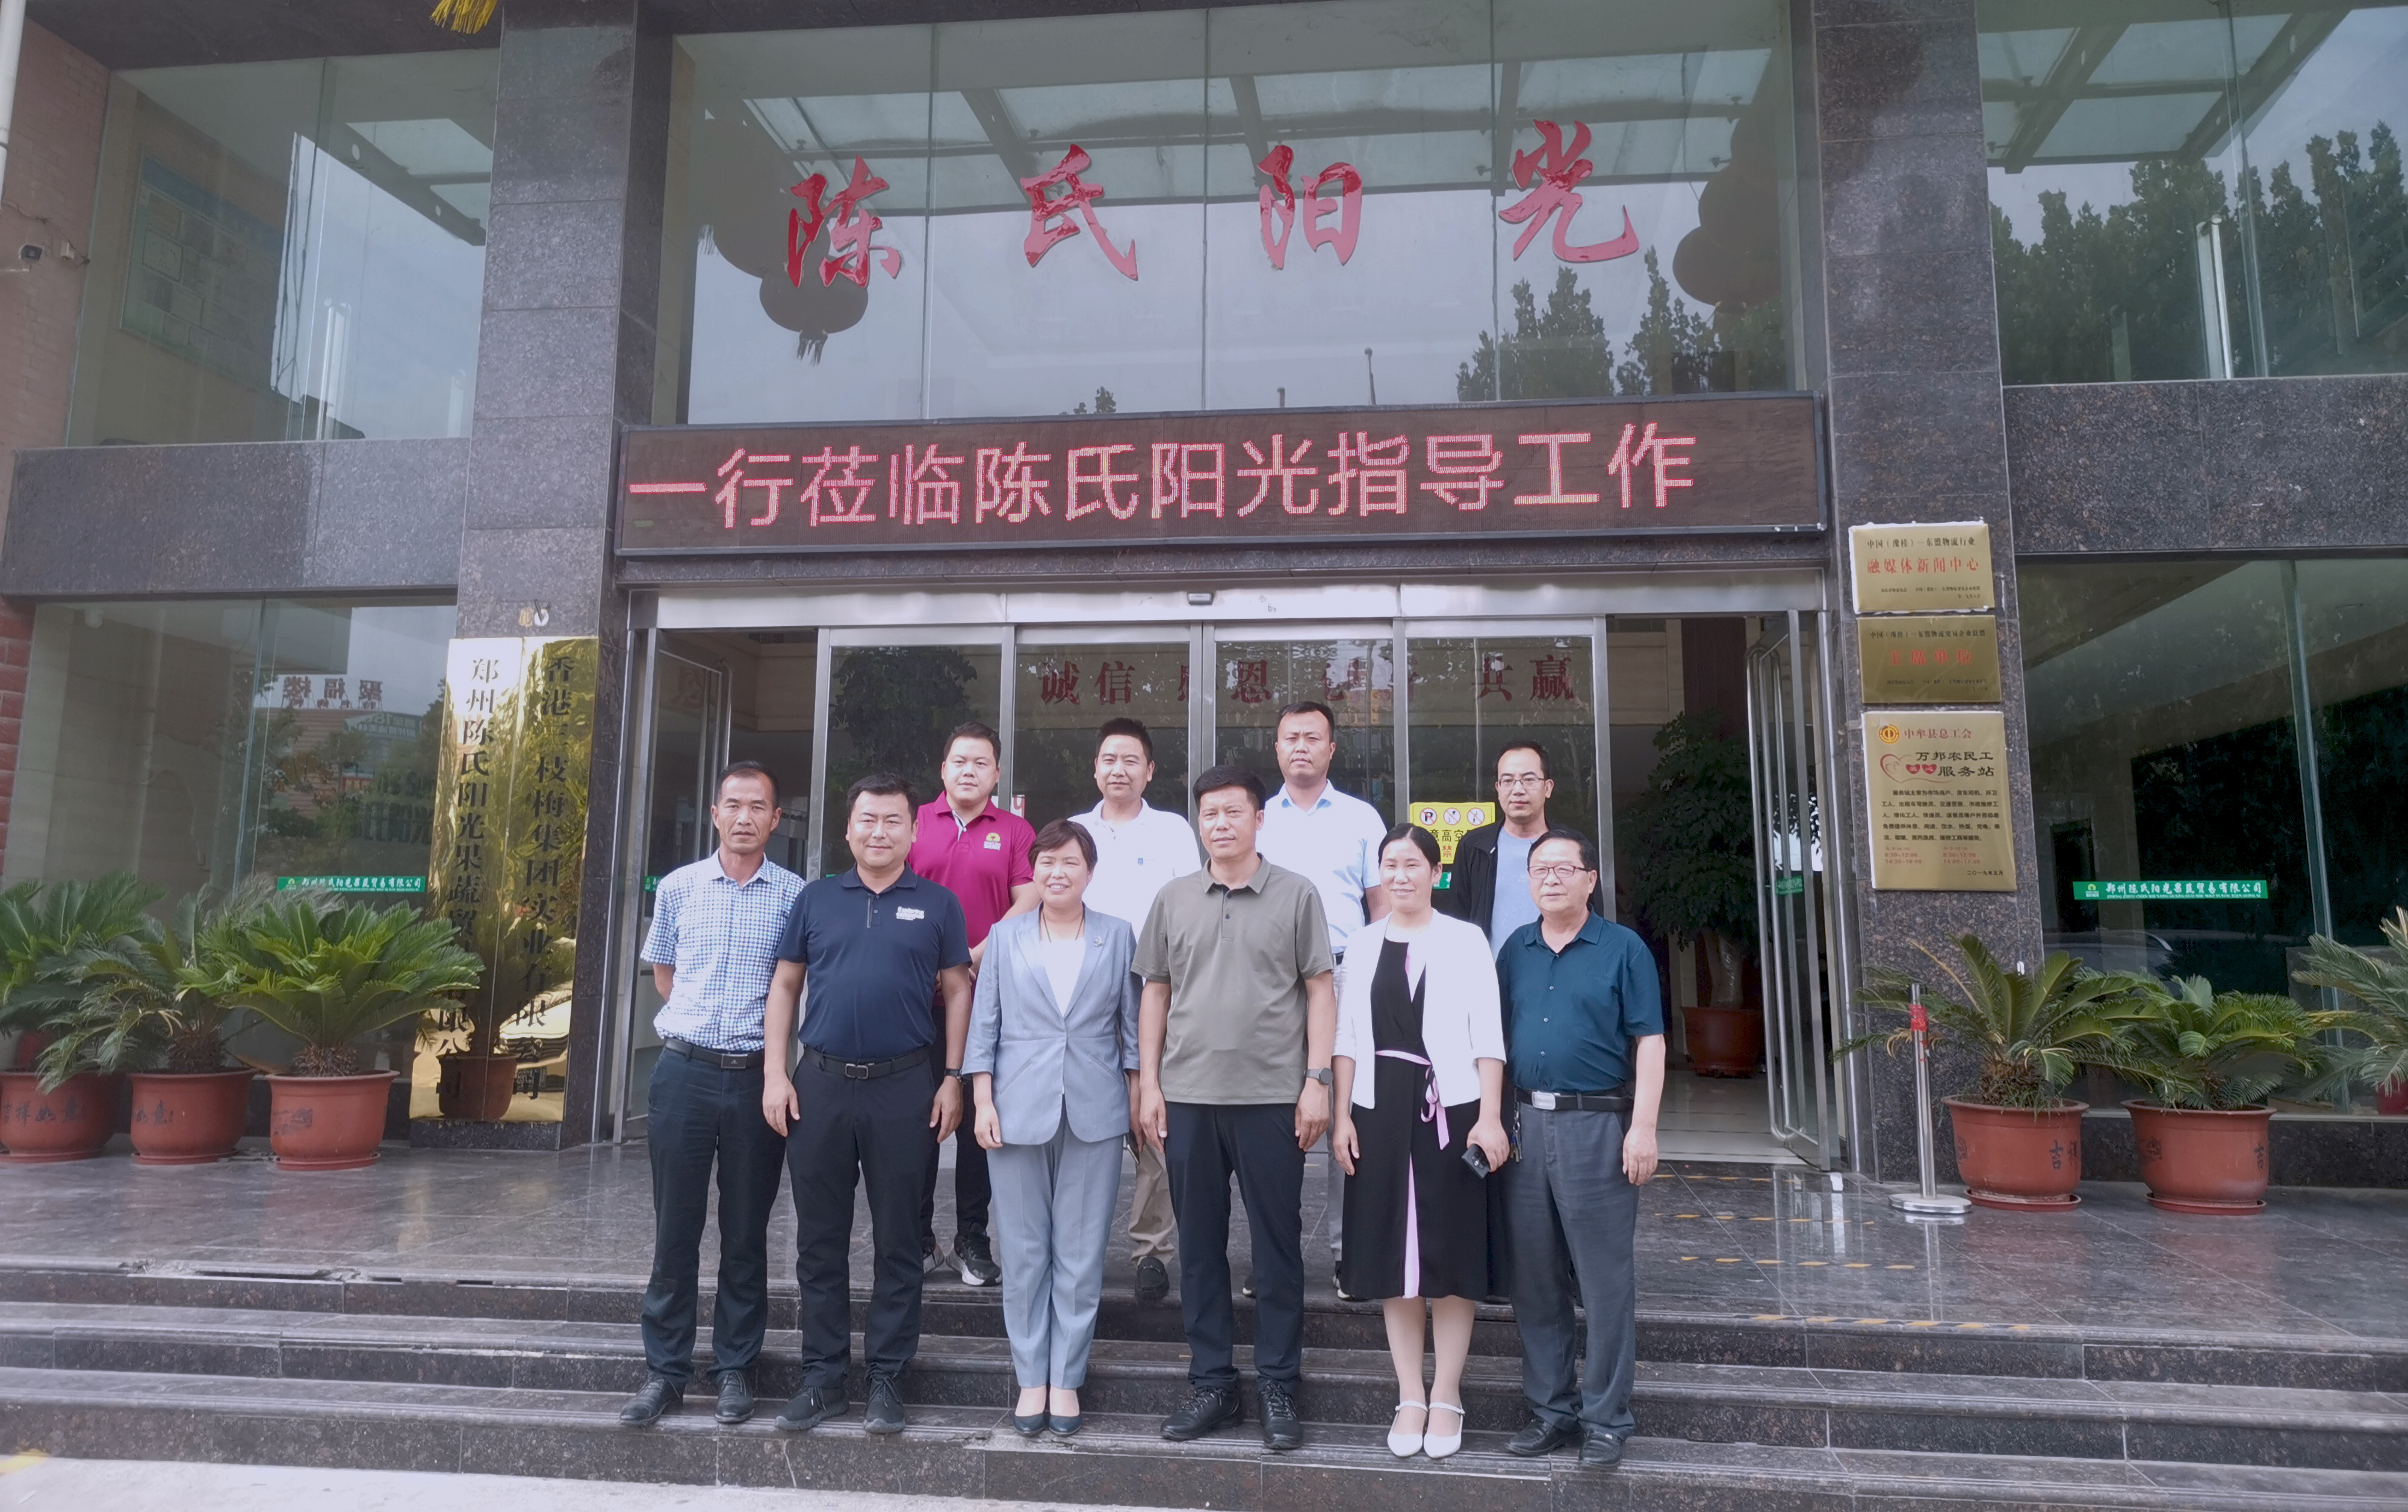 Warmly welcome the leaders of Guazhou County, Gansu Province to visit Chen's Sun Group for inspection and guidance